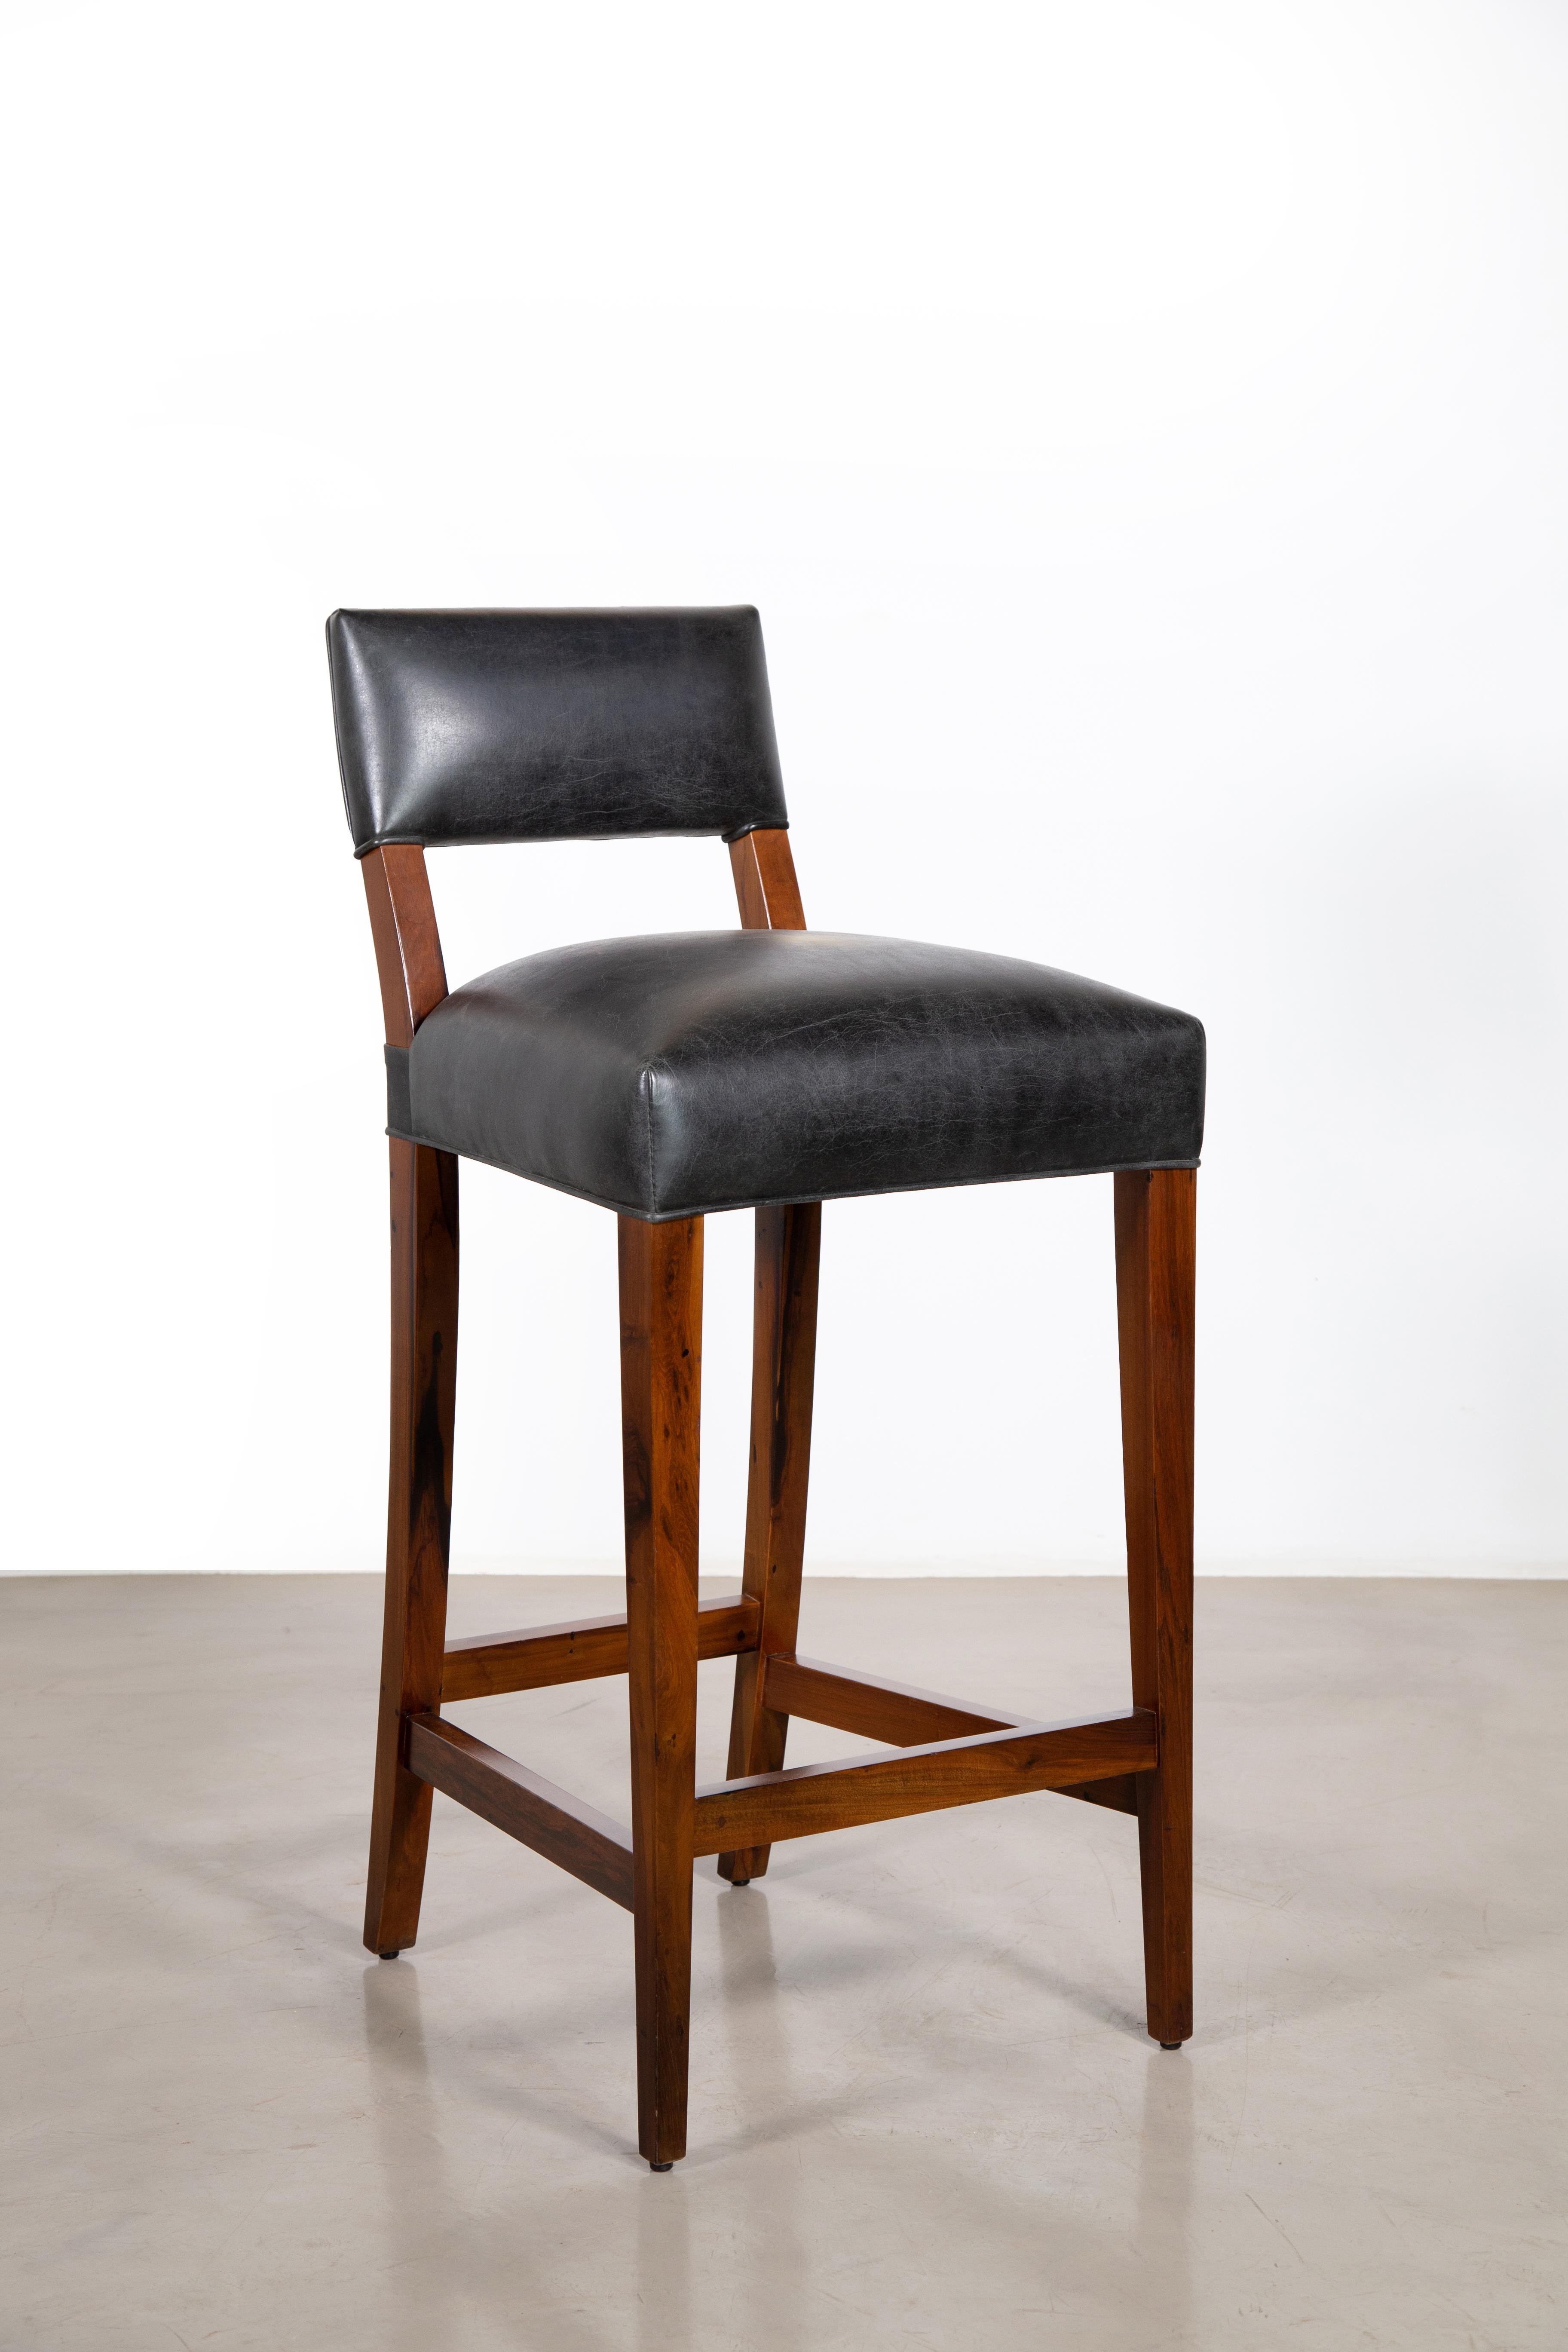 Costantini prides itself in using the hardest and most beautiful hardwoods in the construction of its line of seating. The Neto Stool has a gently curved, relatively low back leg, with sleek, straight front legs and stretchers, with a bronze or